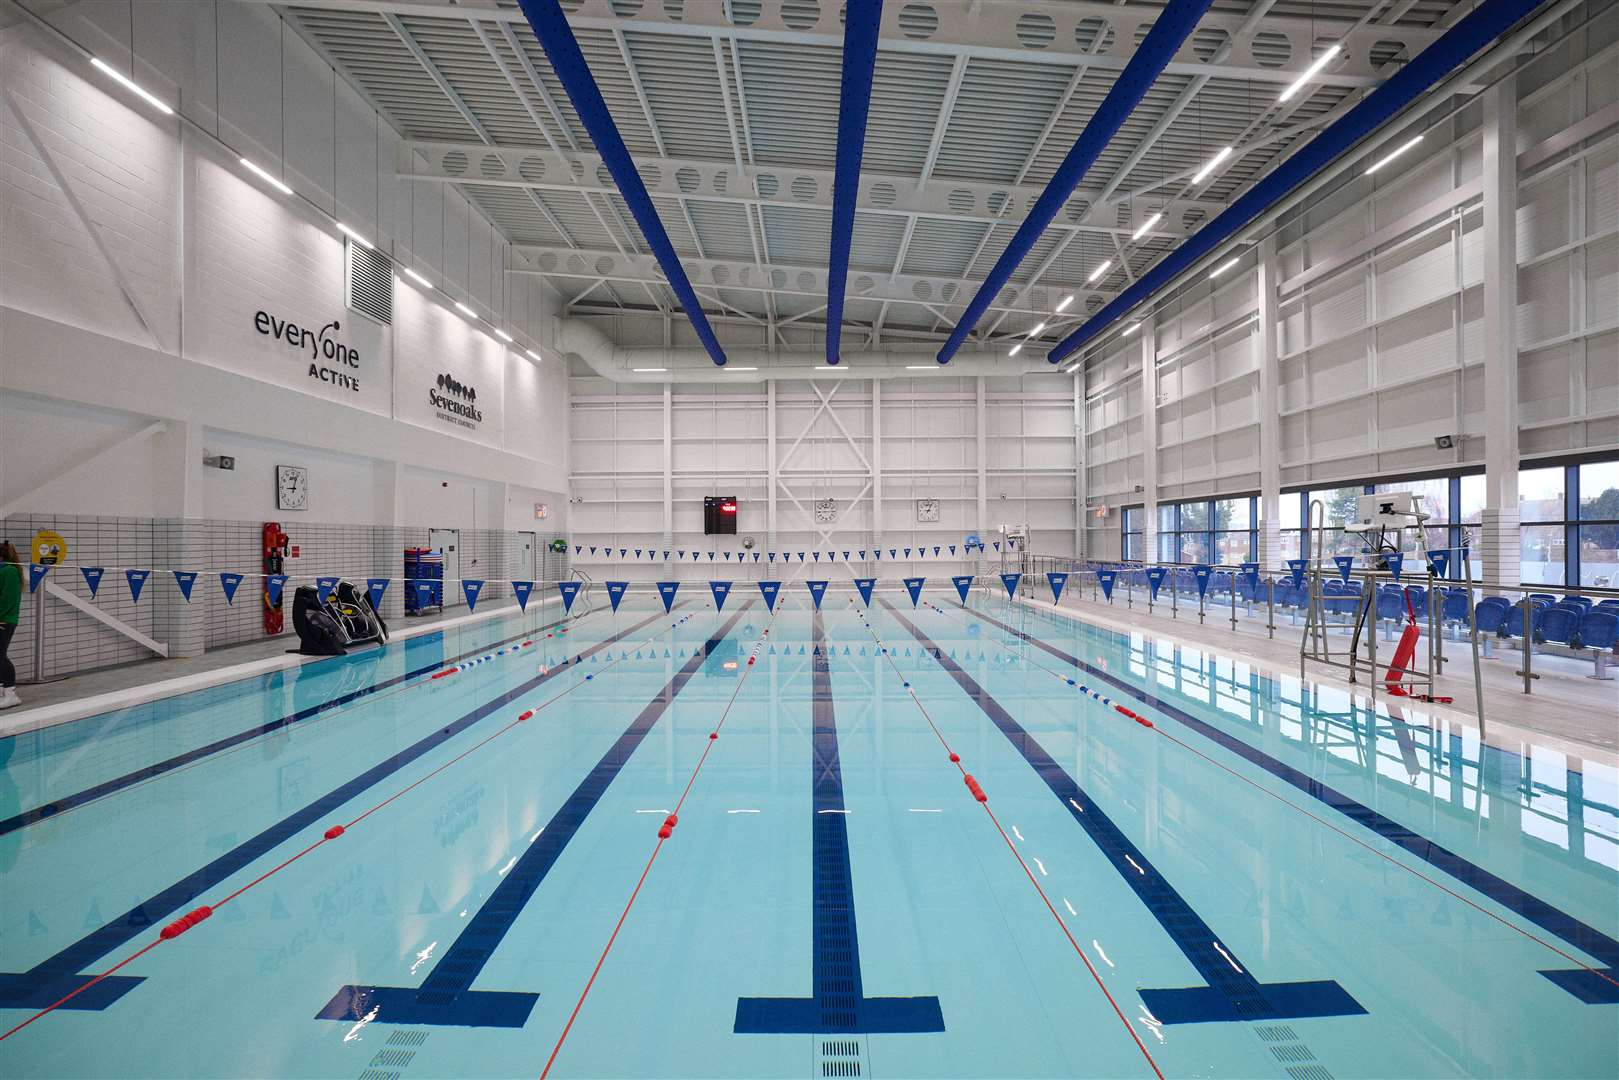 The pool at the White Oak Leisure Centre in Swanley